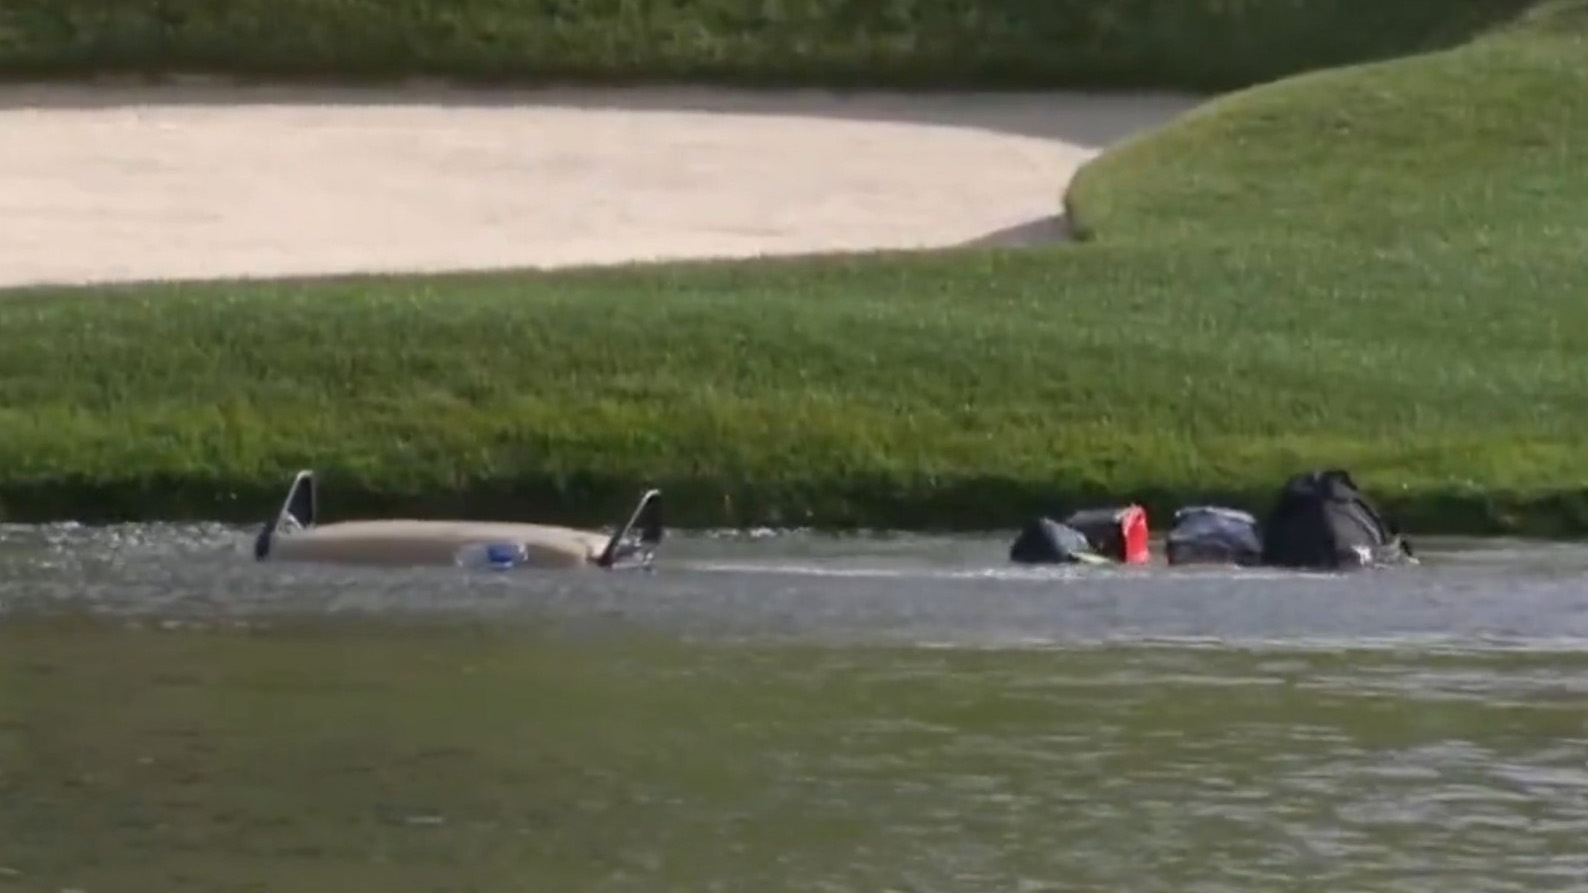 A runaway golf cart dips beneath the surface after it crashed into a pond during the first round of the Travelers Championship in the US.